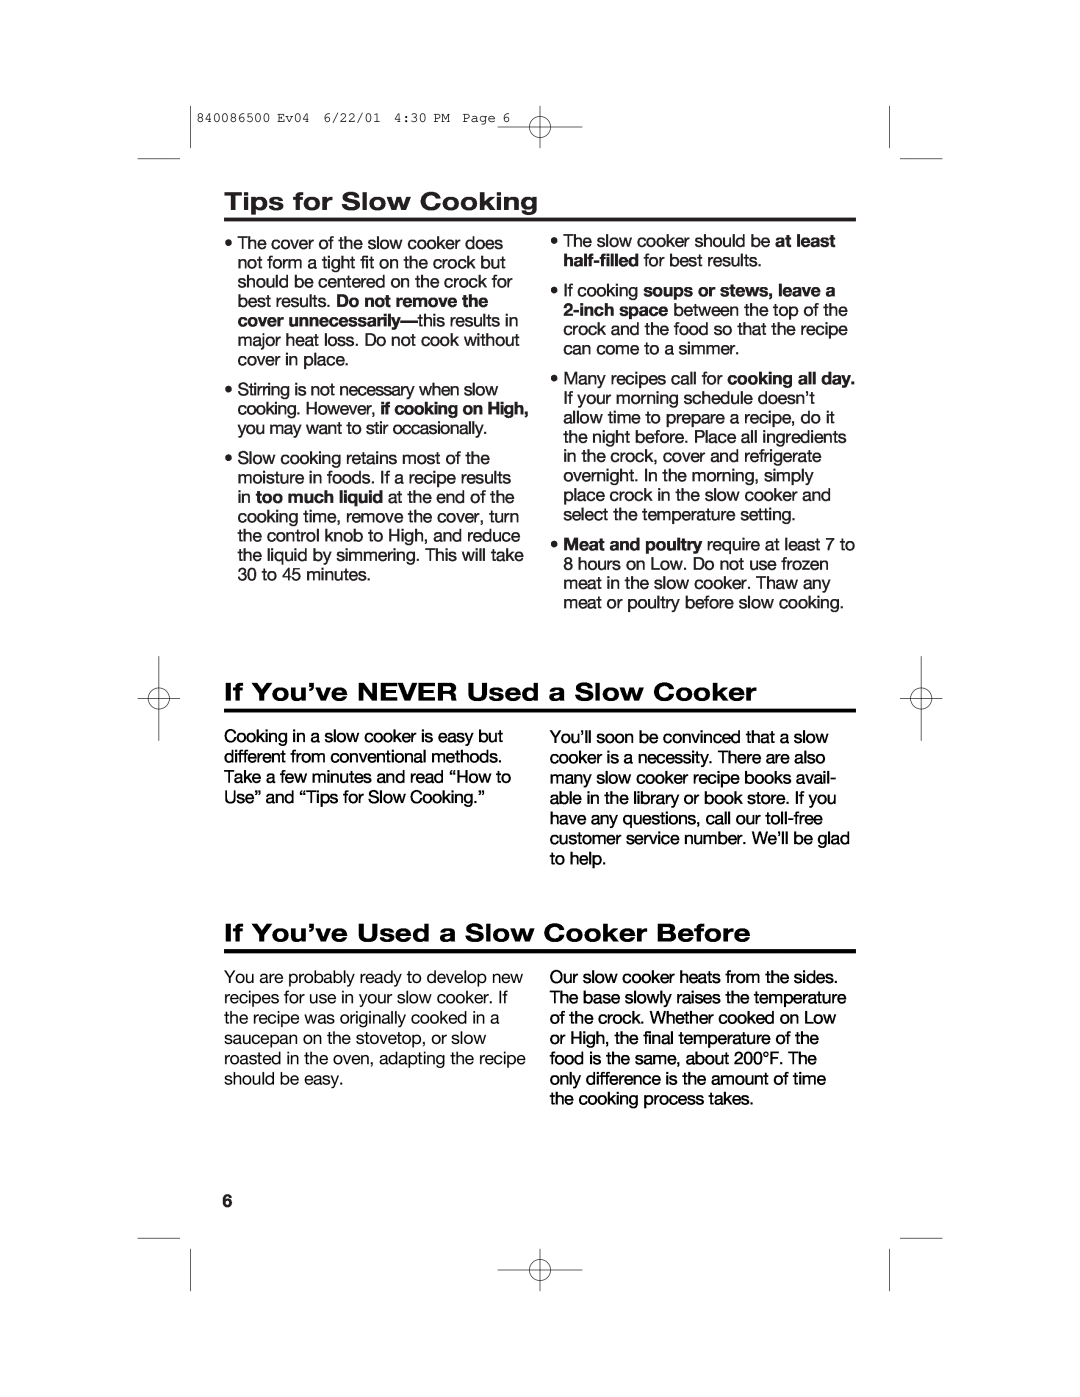 Hamilton Beach 33158 manual Tips for Slow Cooking, If You’ve NEVER Used a Slow Cooker, If You’ve Used a Slow Cooker Before 